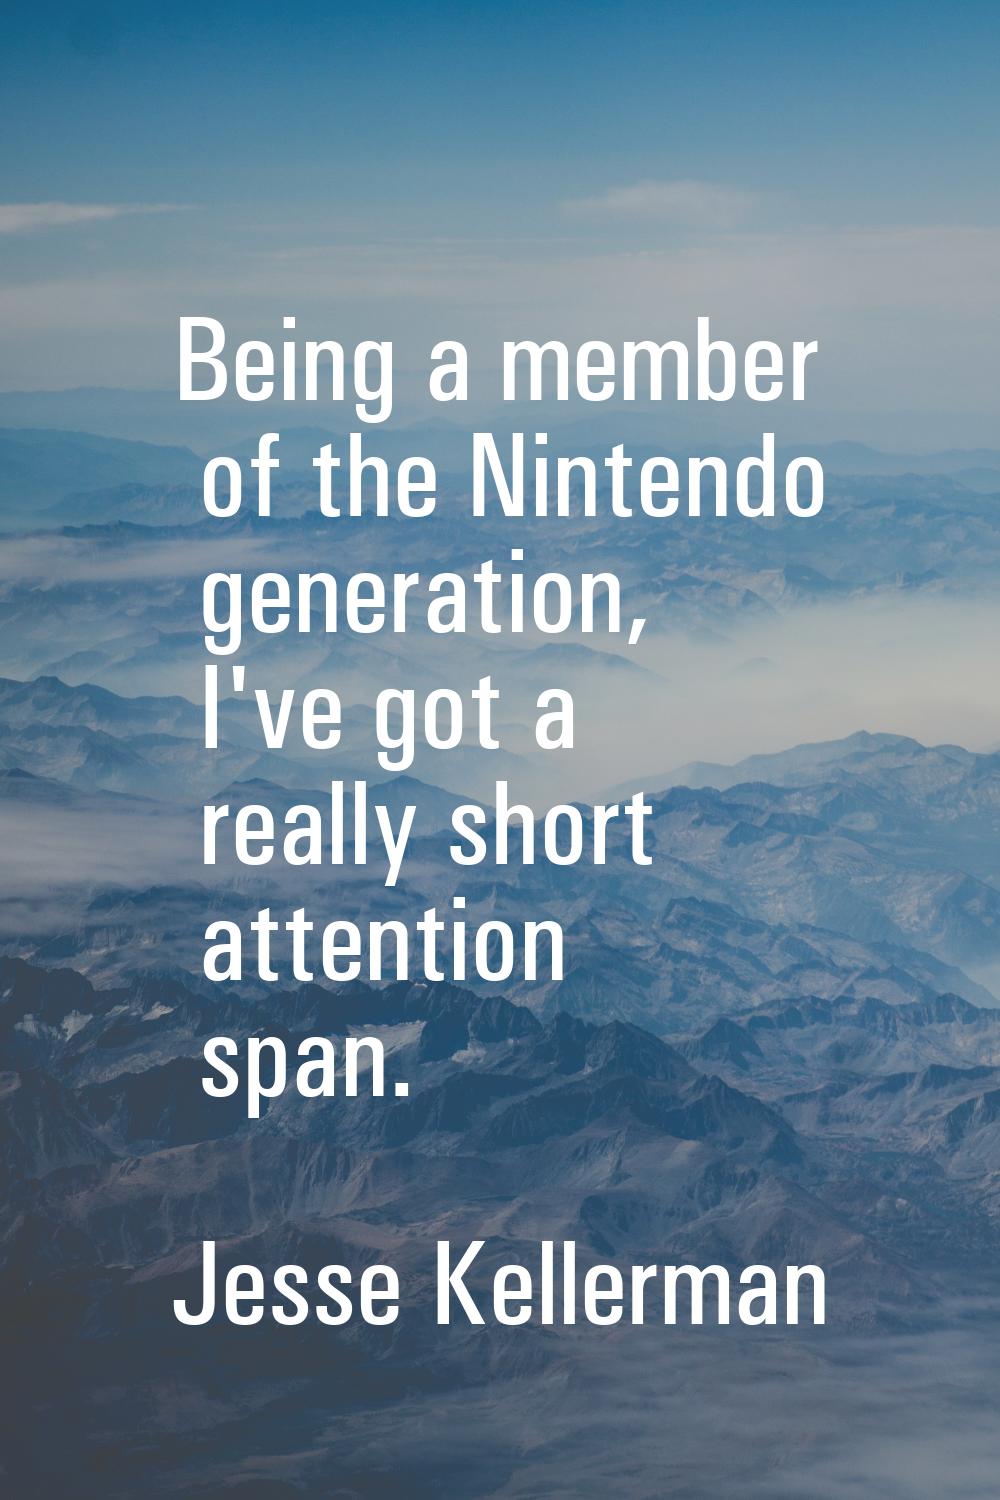 Being a member of the Nintendo generation, I've got a really short attention span.